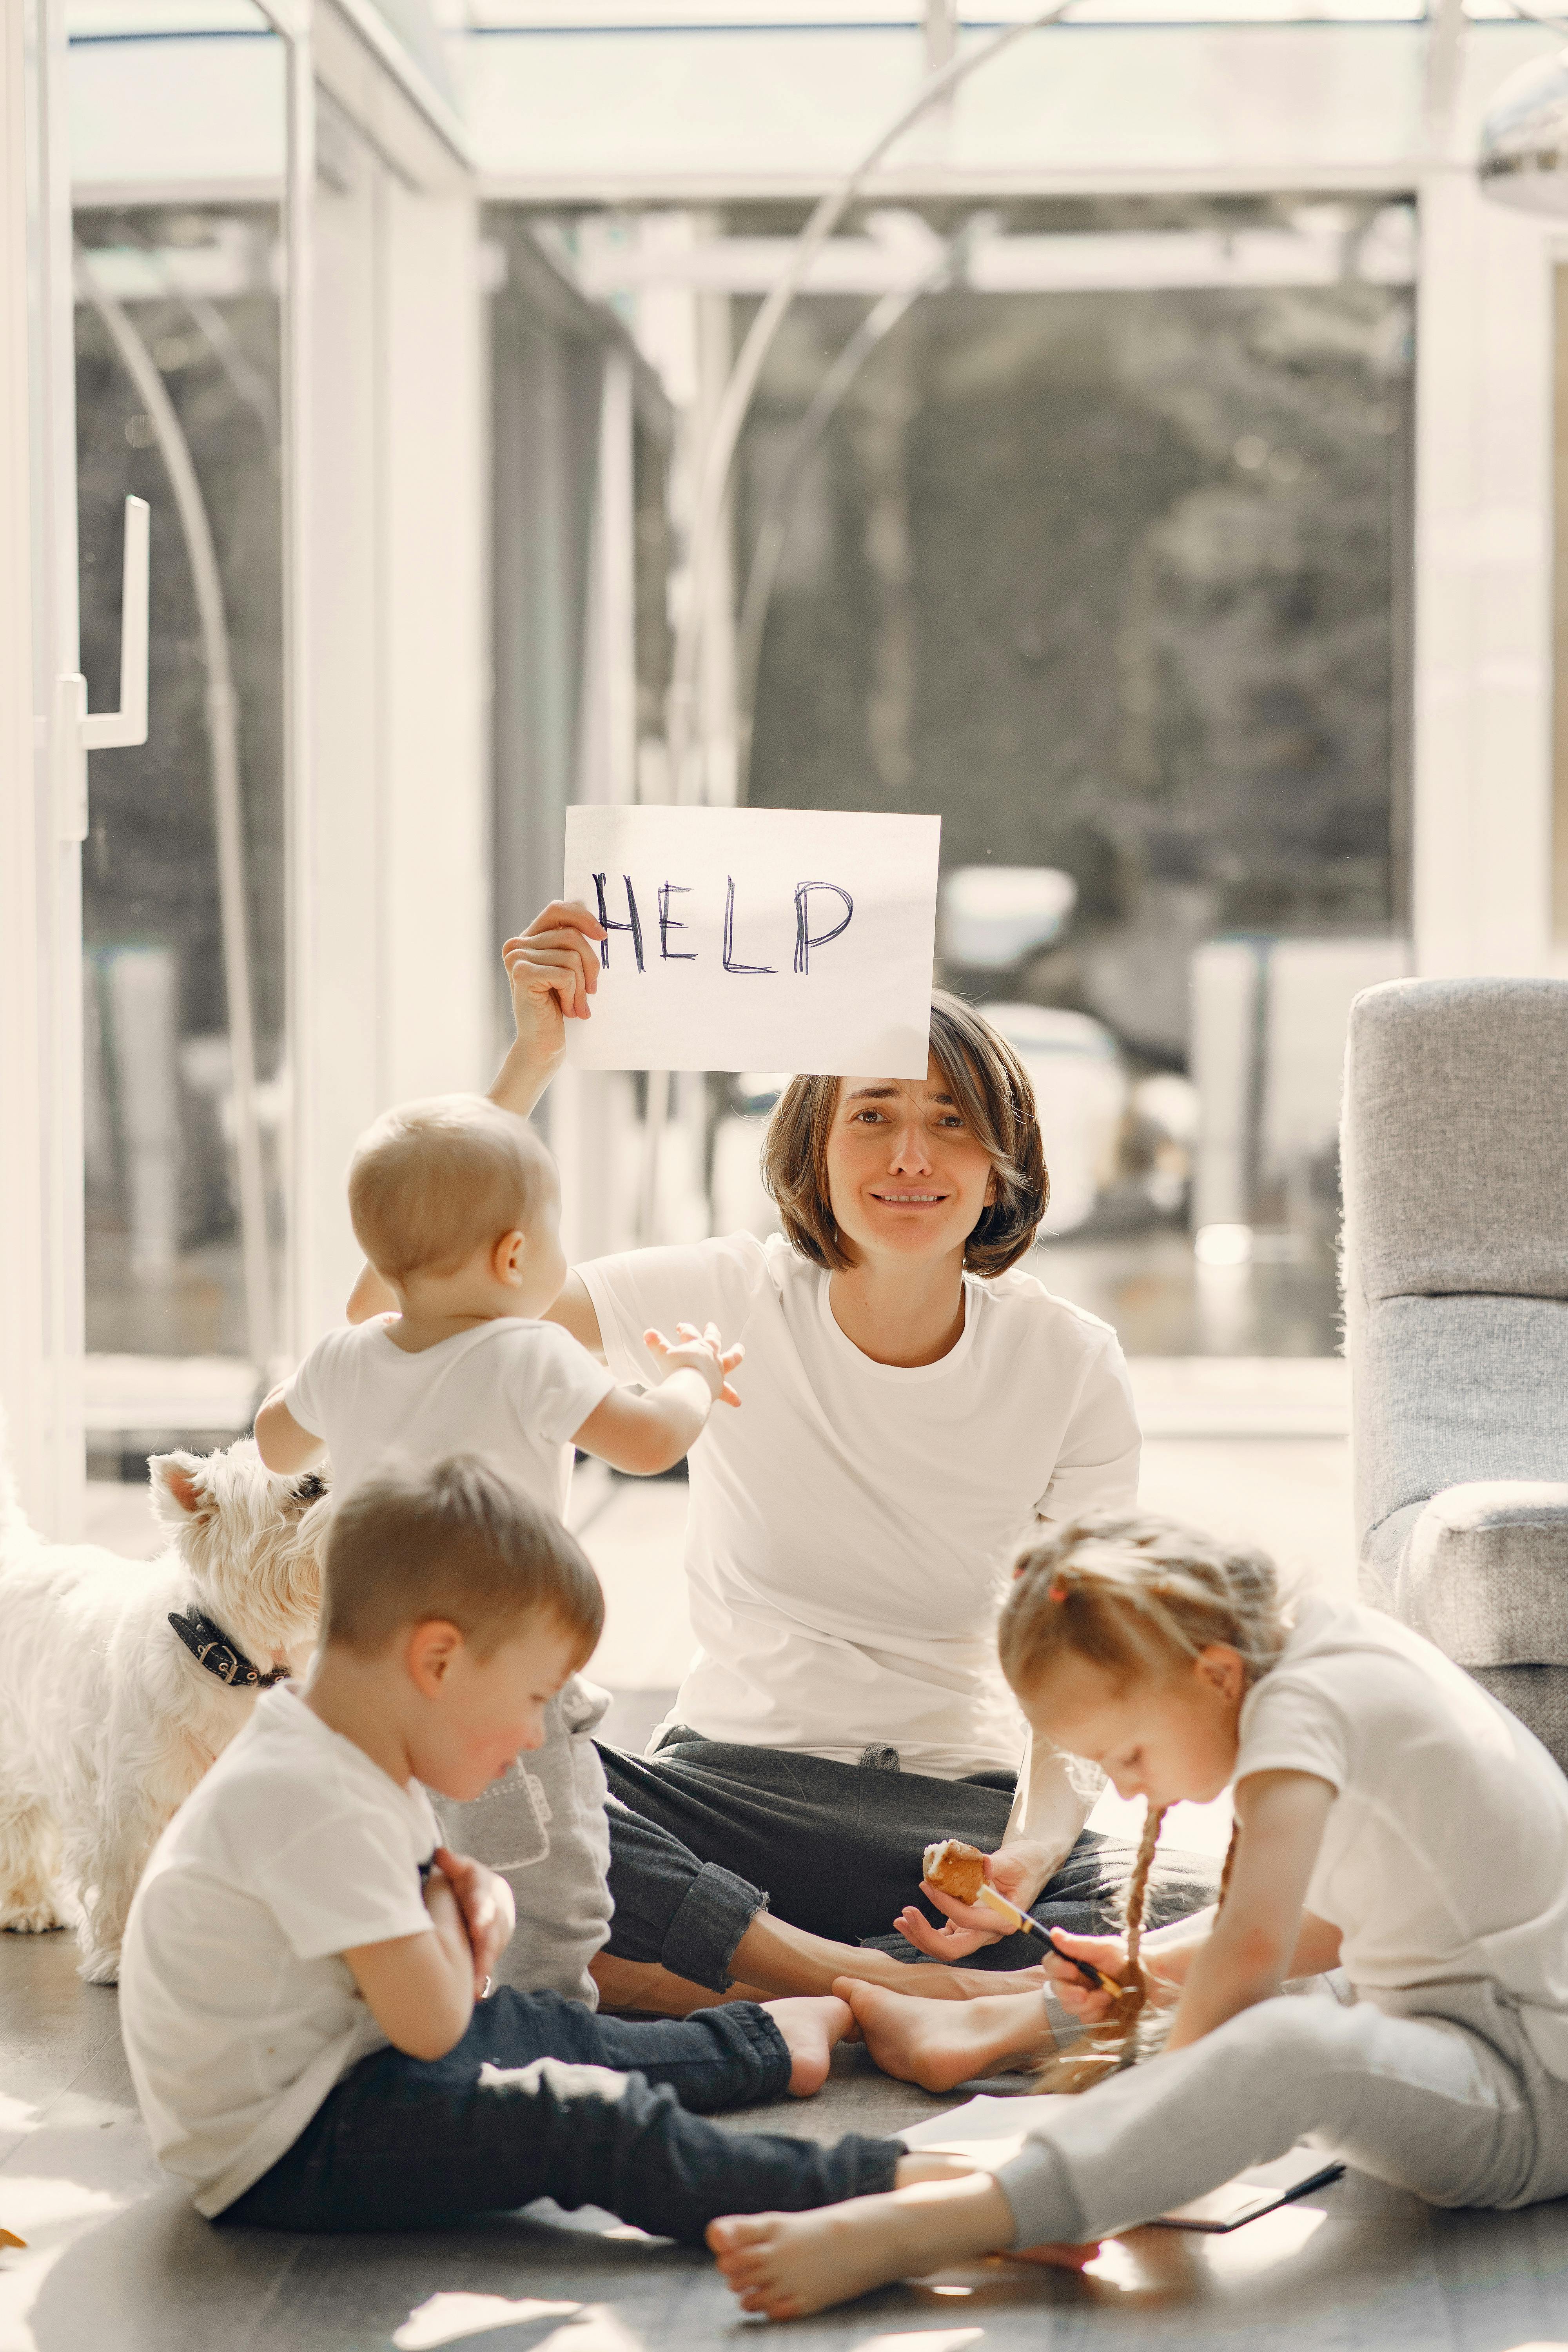 A tired mother asking for help | Source: Pexels